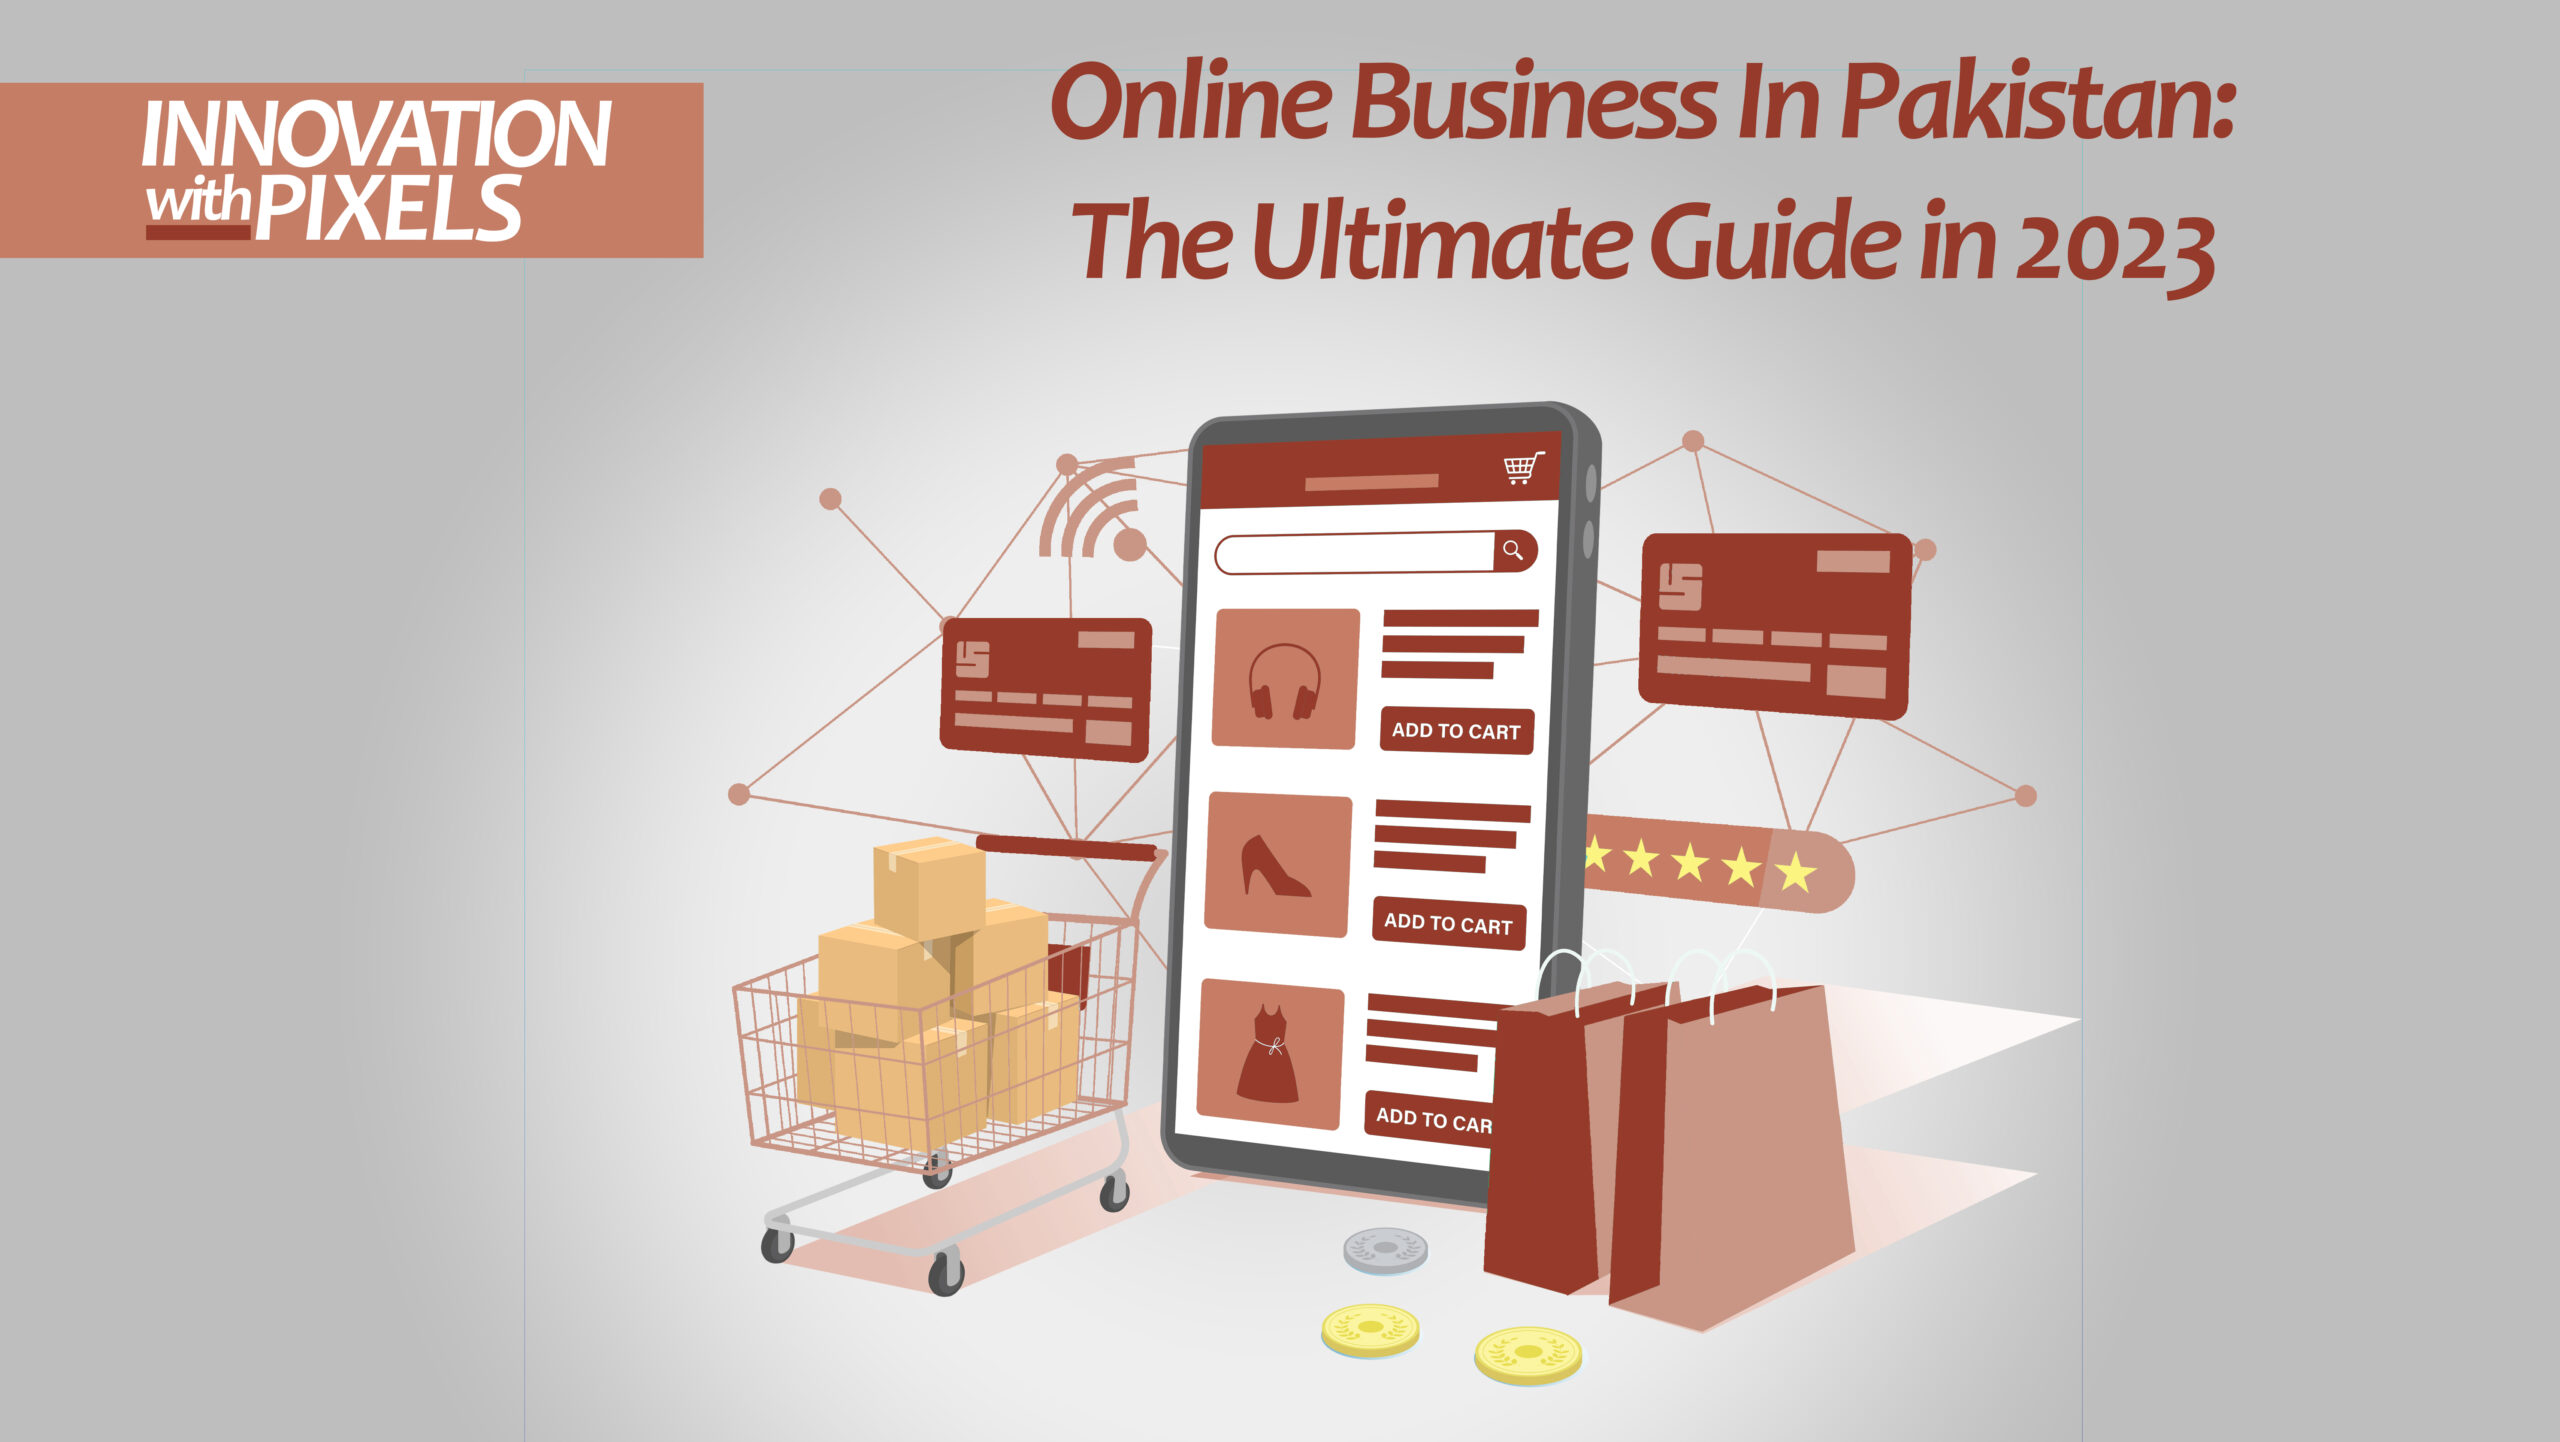 Online Business In Pakistan: The Ultimate Guide in 2023